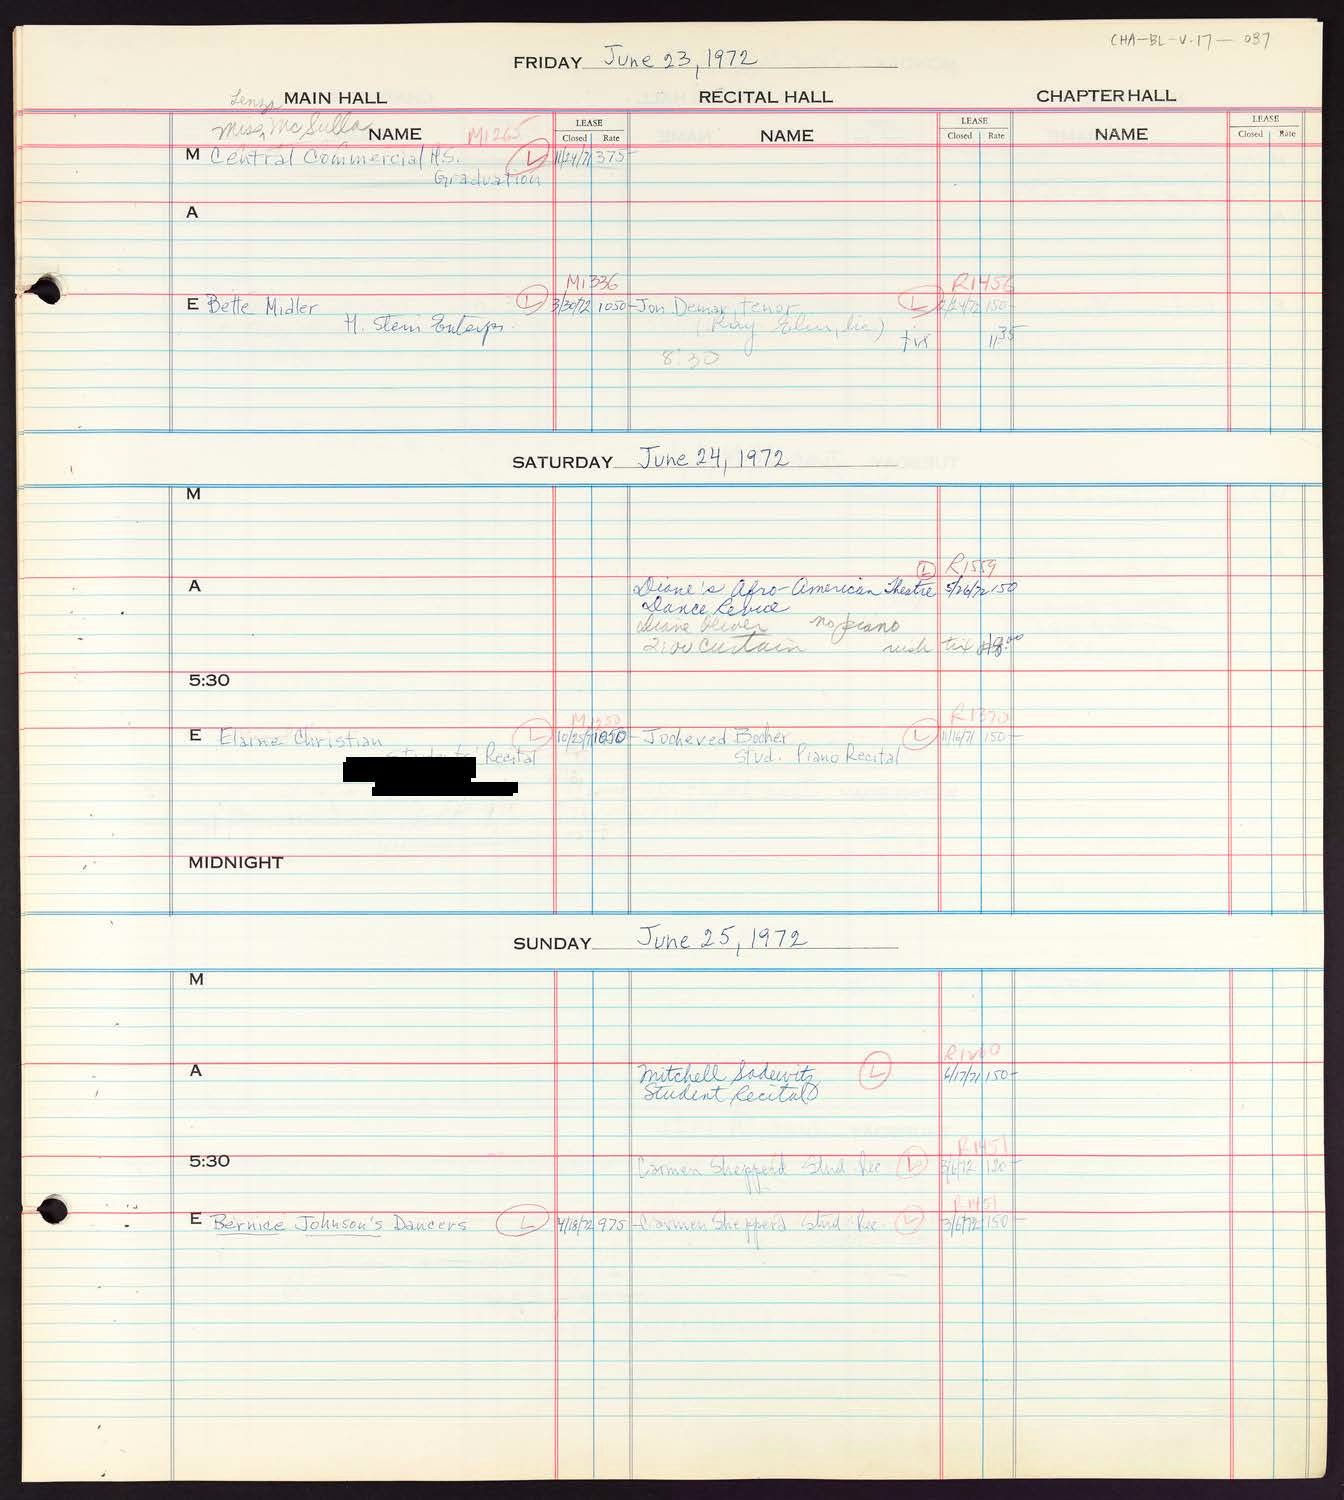 Carnegie Hall Booking Ledger, volume 17, page 87